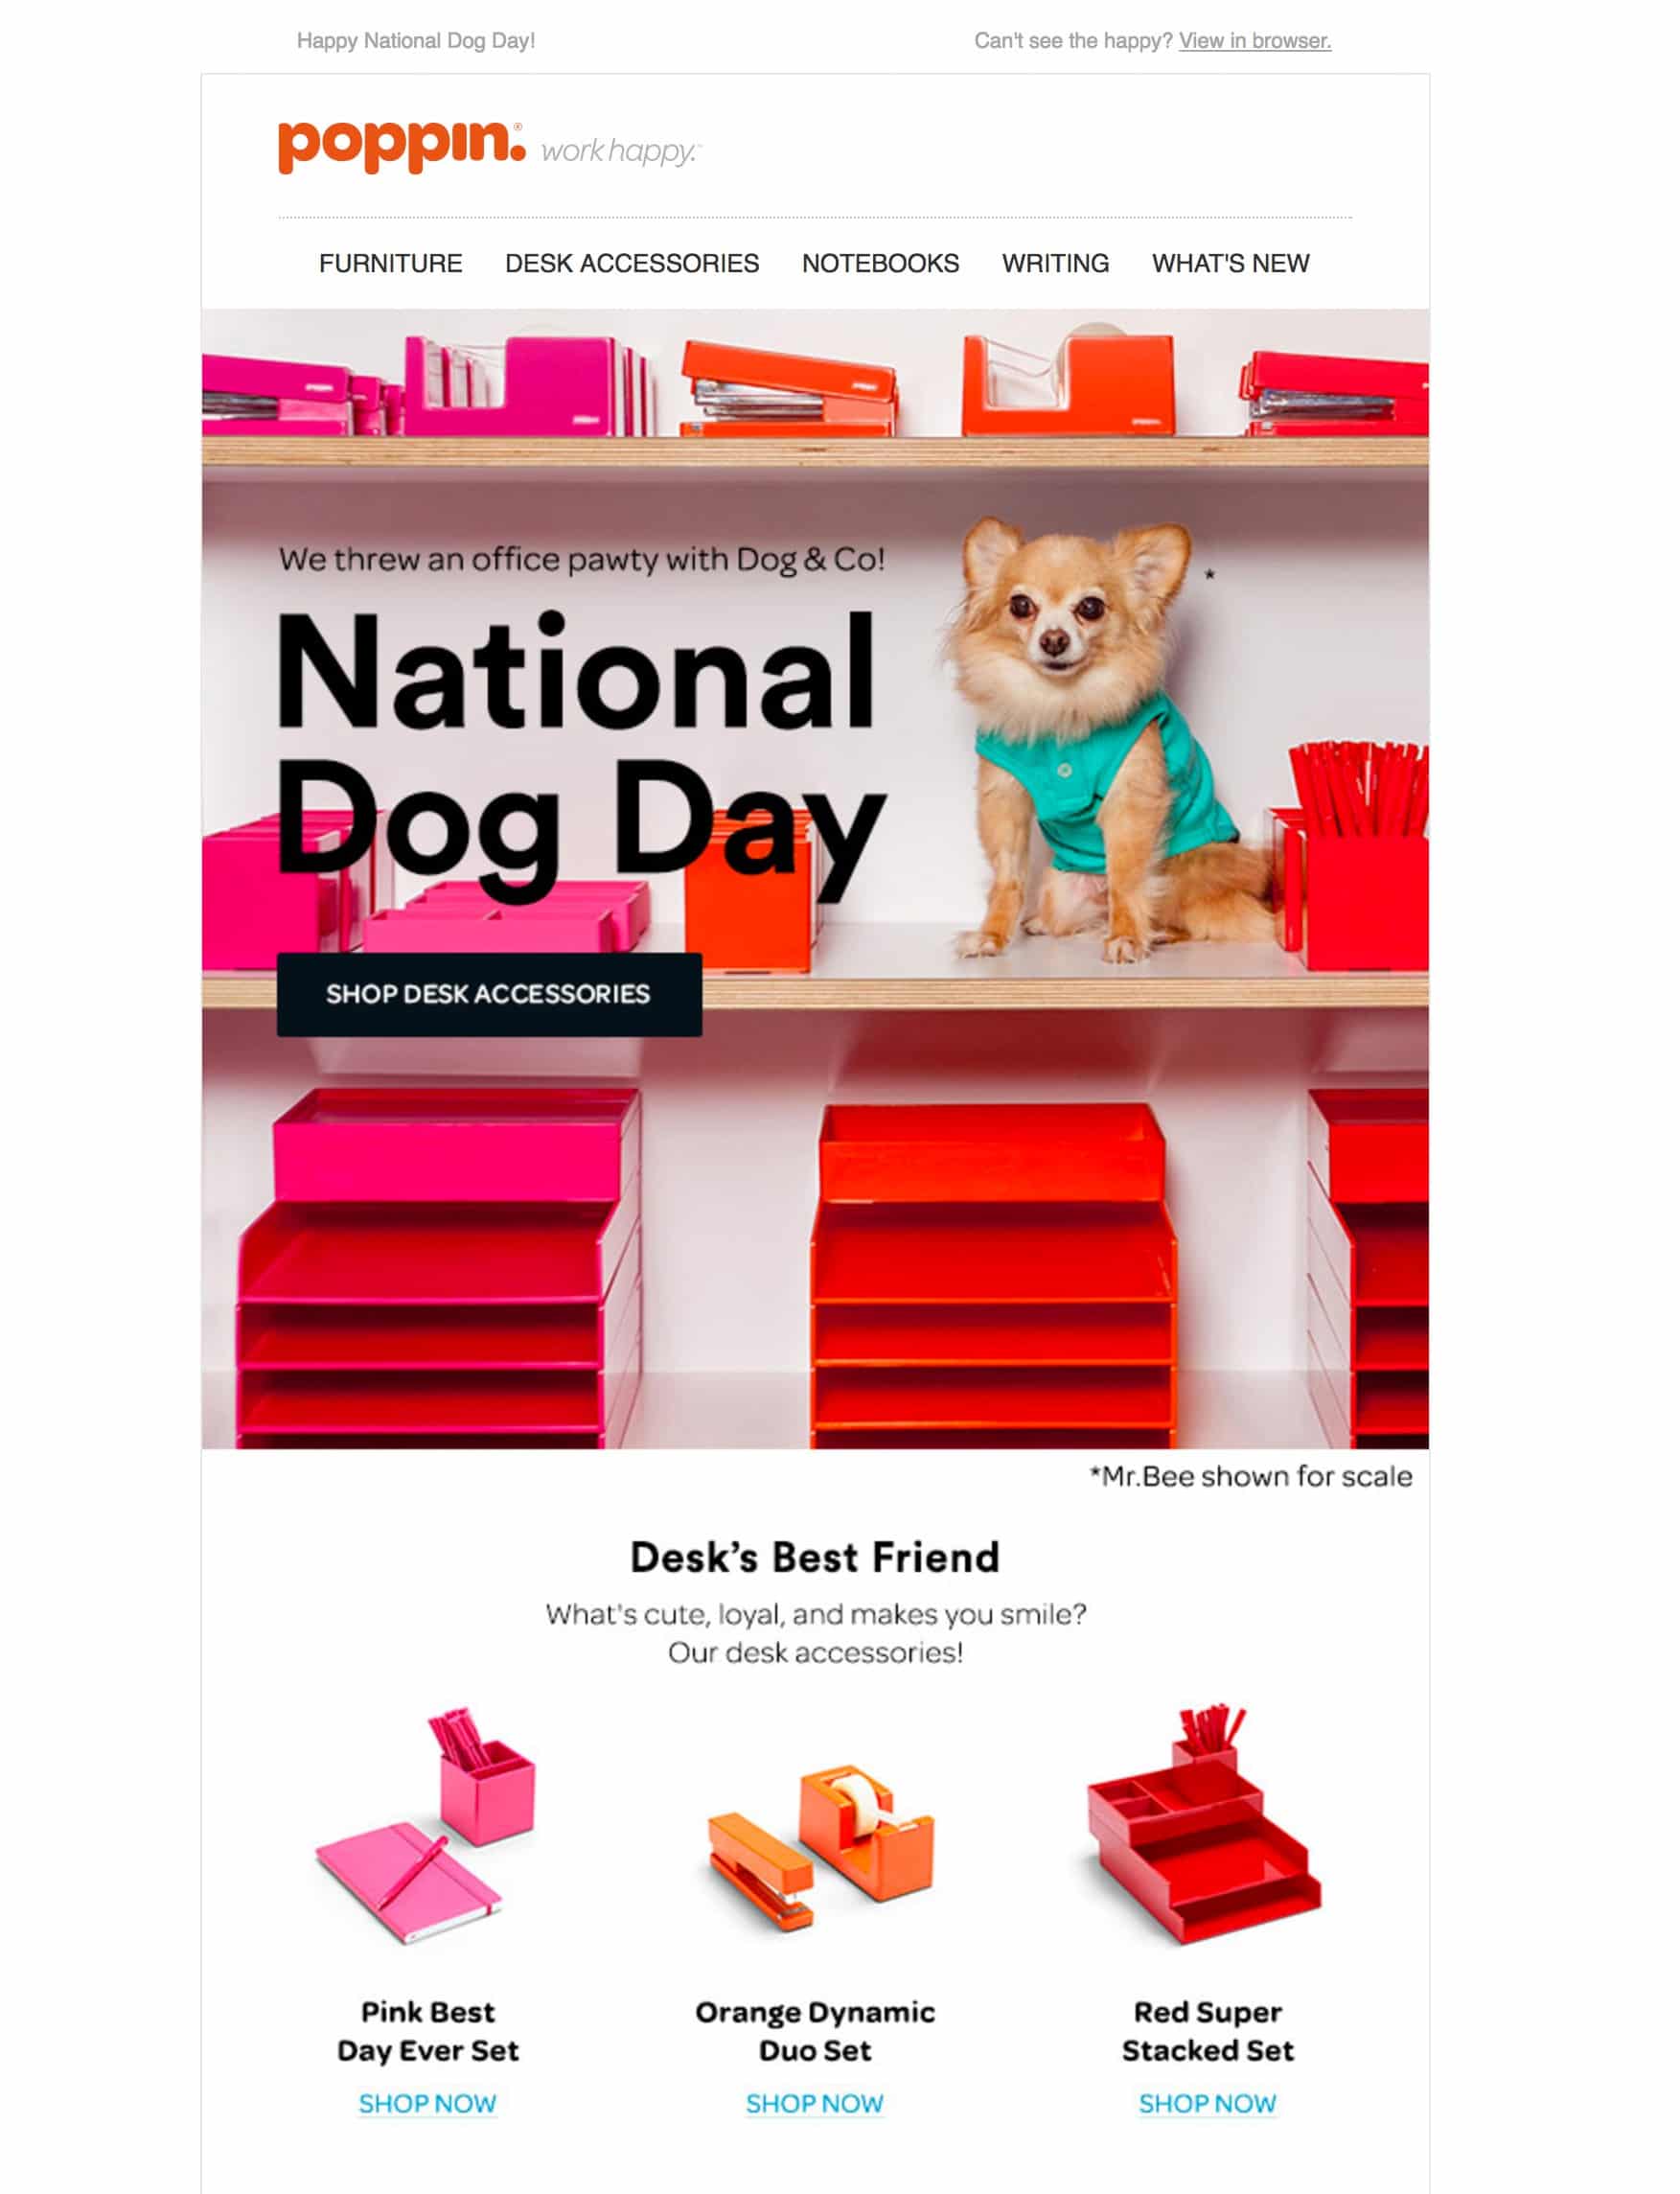 National Dog day is an overlooked holiday for some email marketers, but not for Poppin